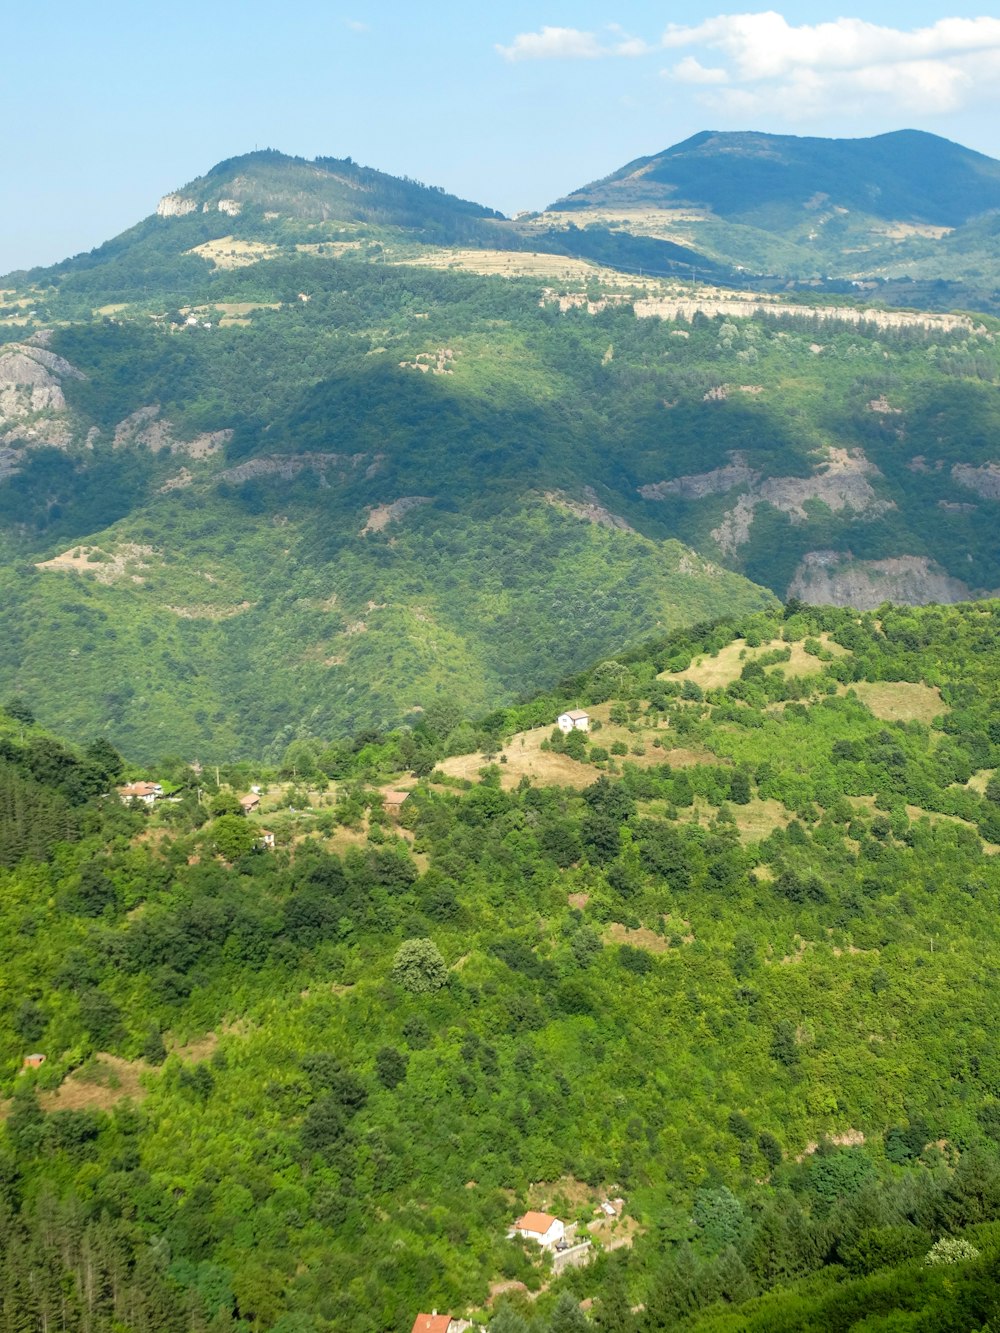 a view of a lush green hillside with mountains in the background